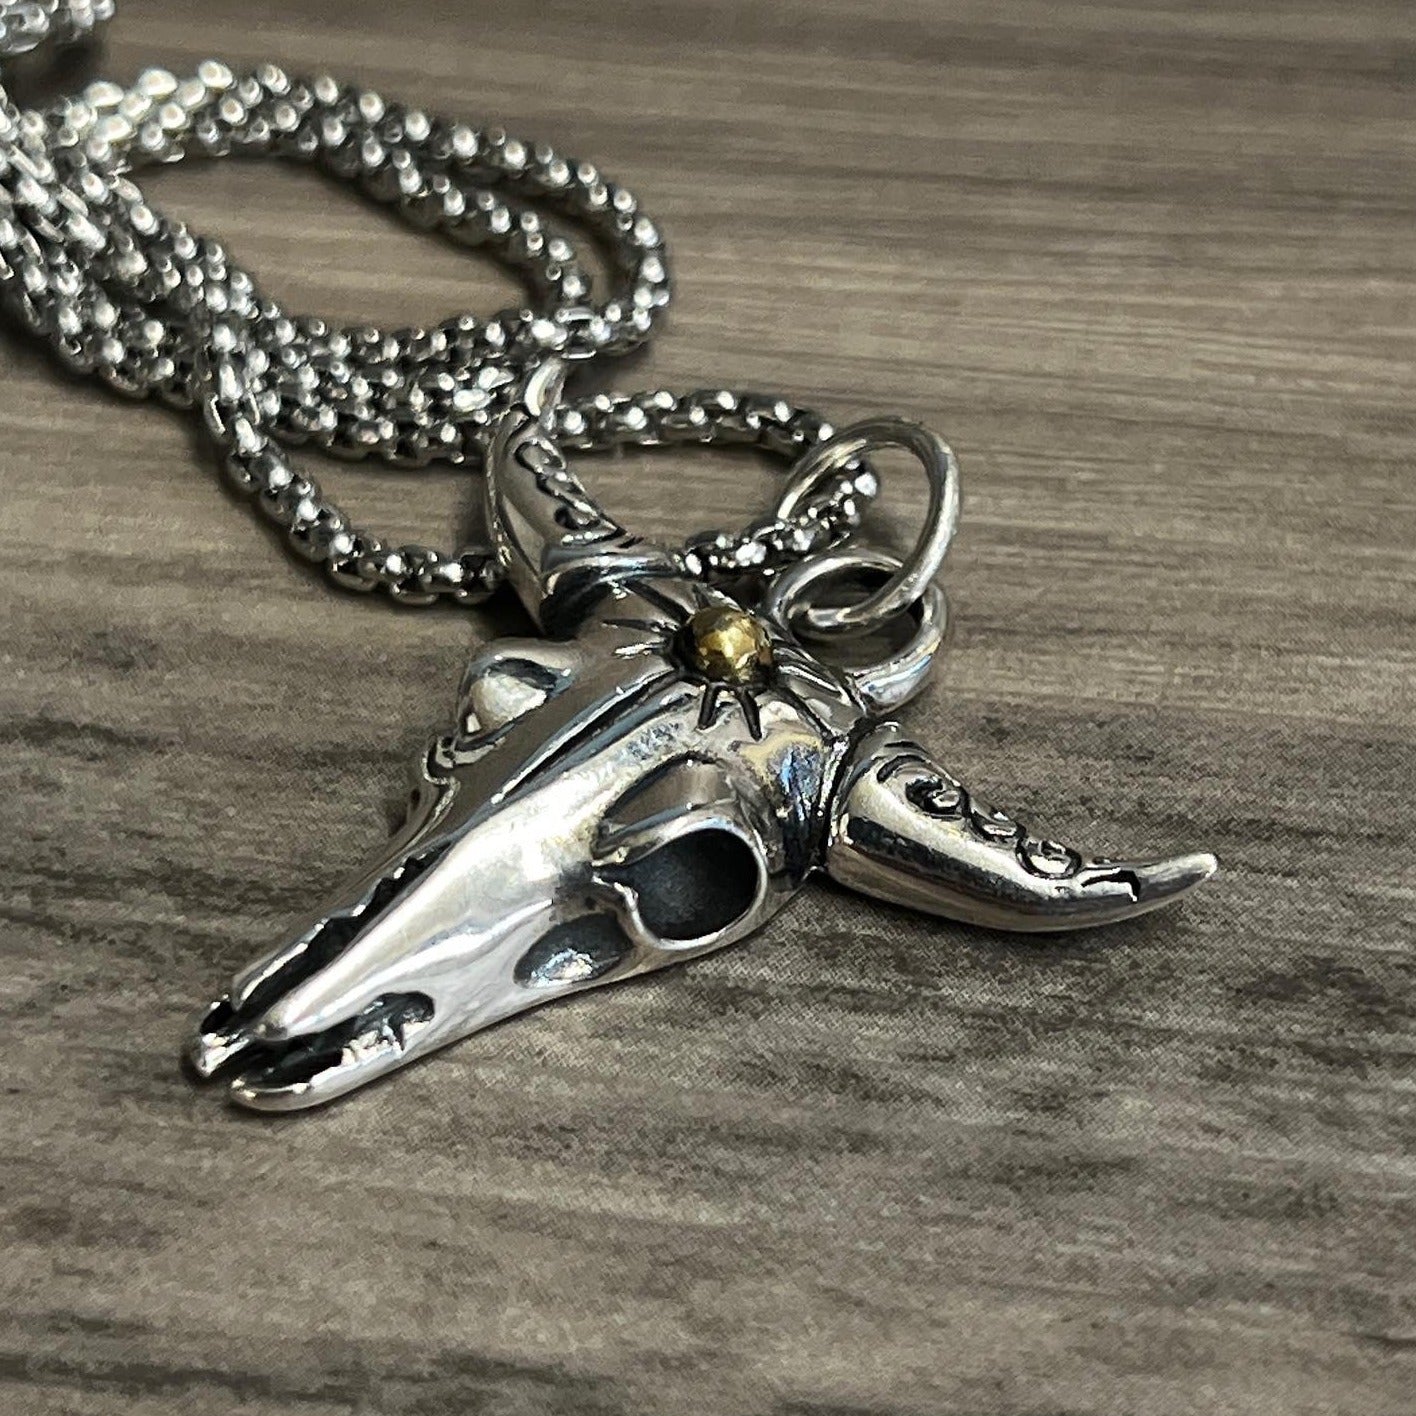 Bull's head necklace for men, men's bull head necklace with gray cord,  silver charm. gift for him, cowboy country necklace, men jewelry – Shani &  Adi Jewelry